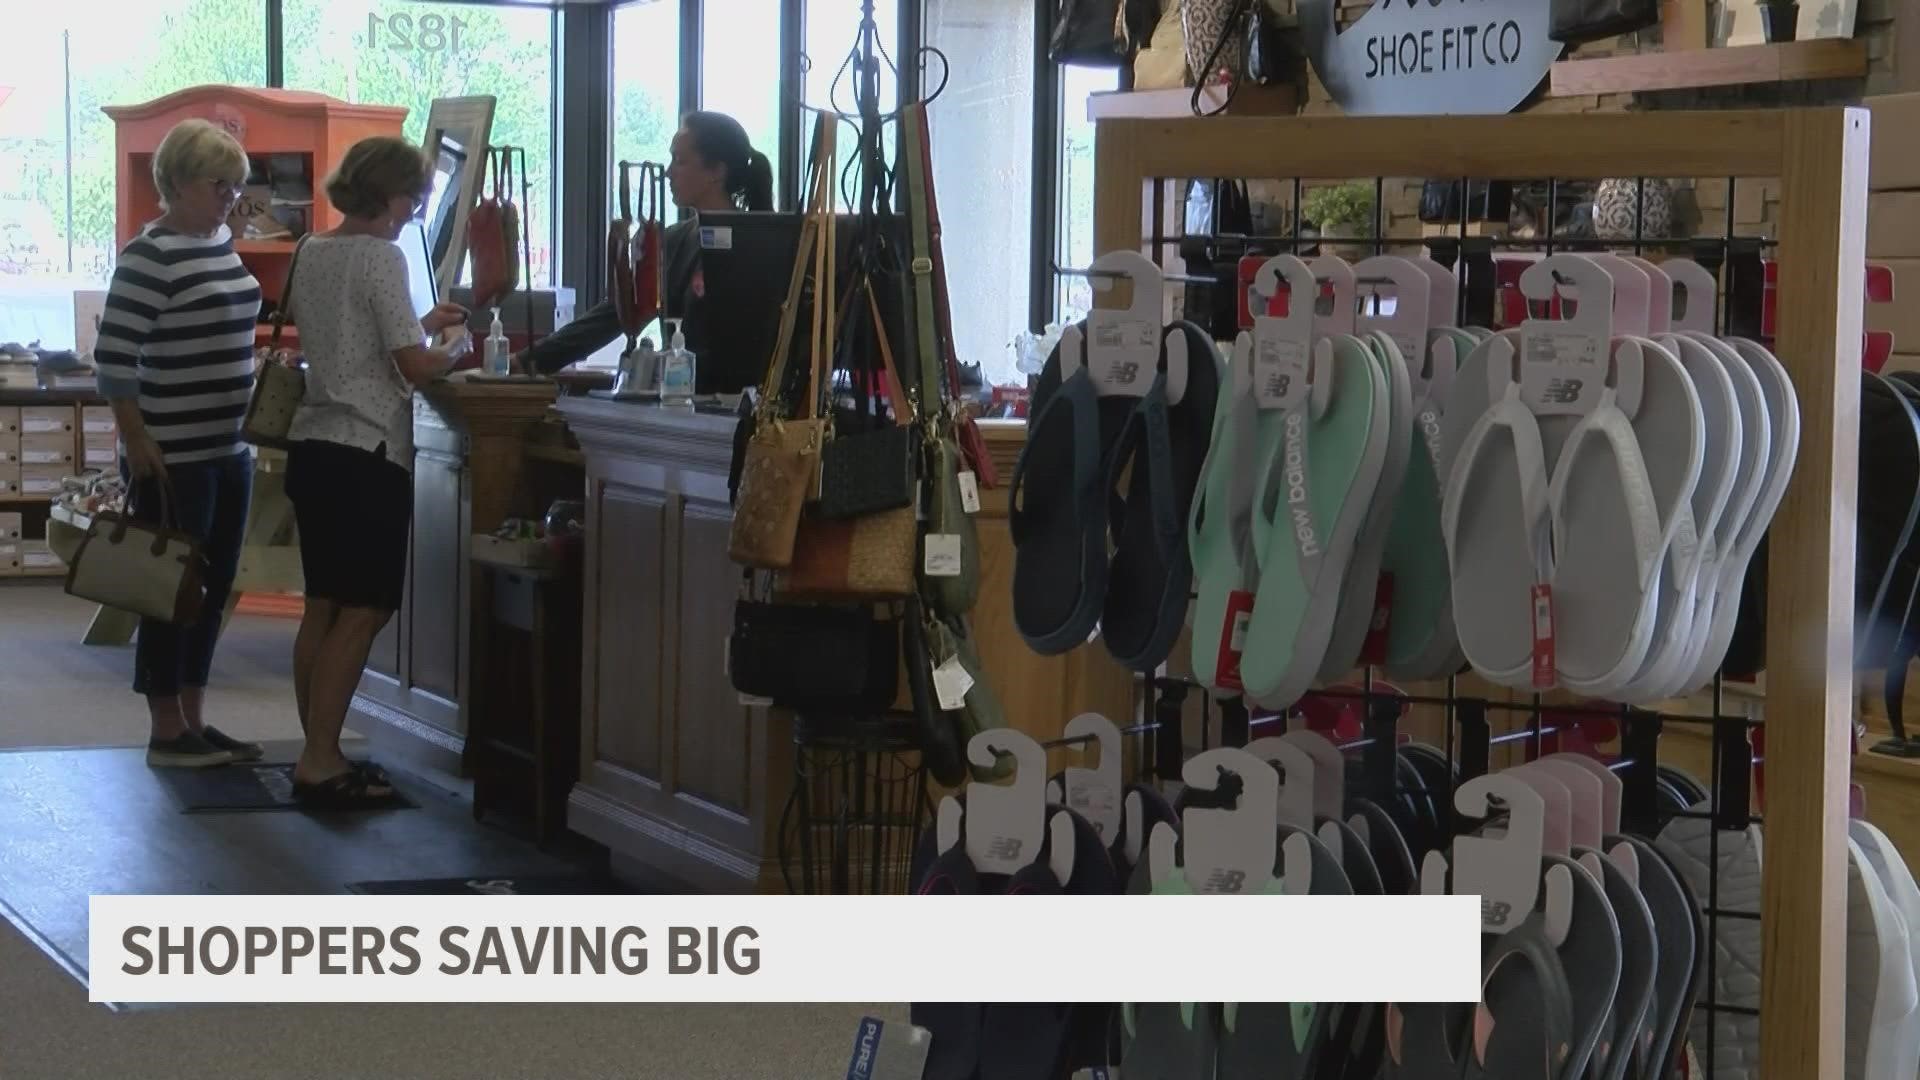 Iowans get to skip the sales tax on shoes and clothes the first Friday and Saturday of August.